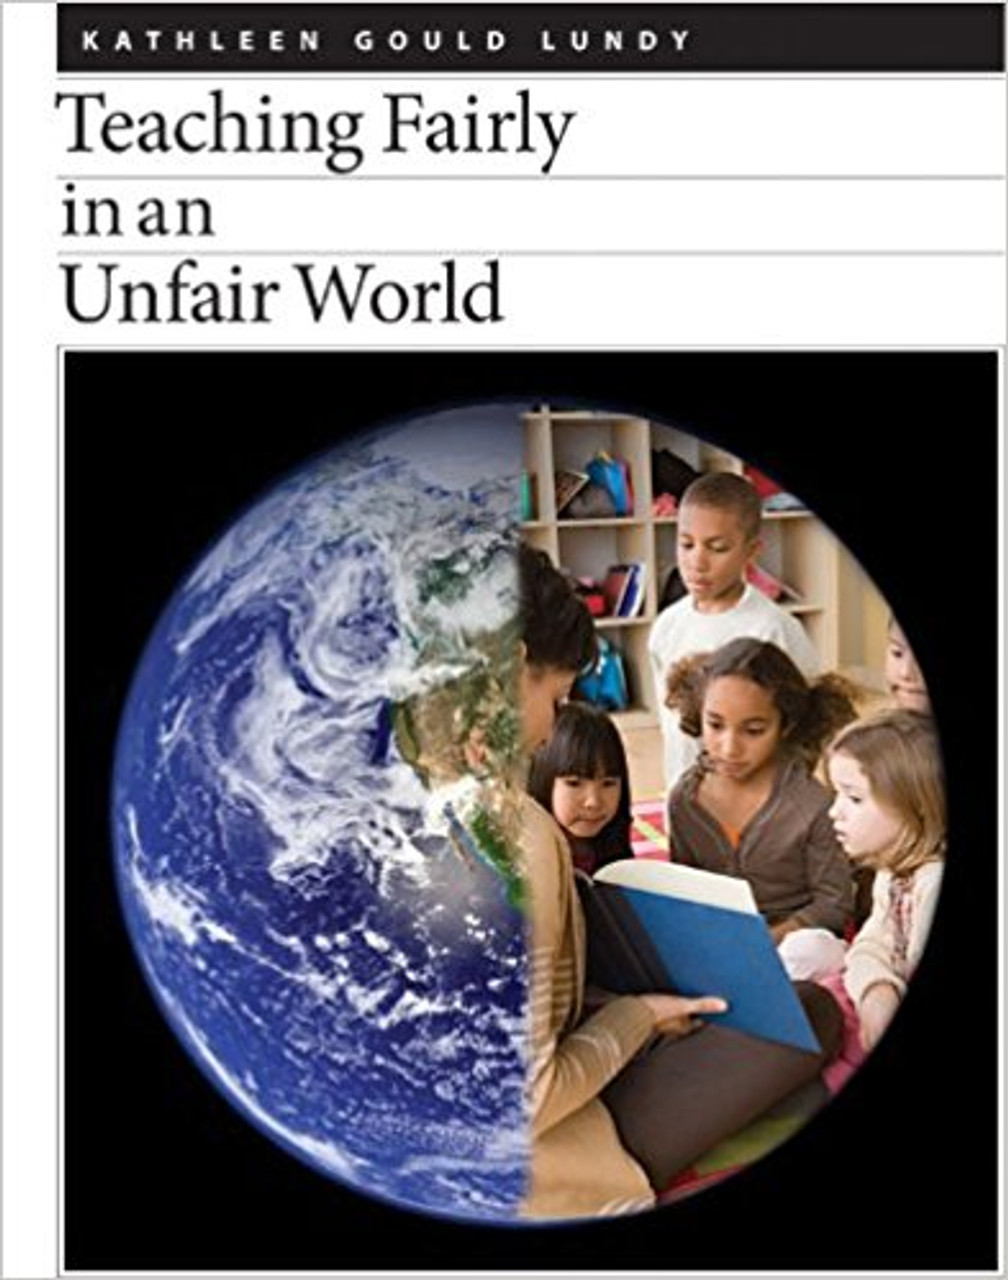 Teaching Fairly in an Unfair World by Kathleen Gould Lundy